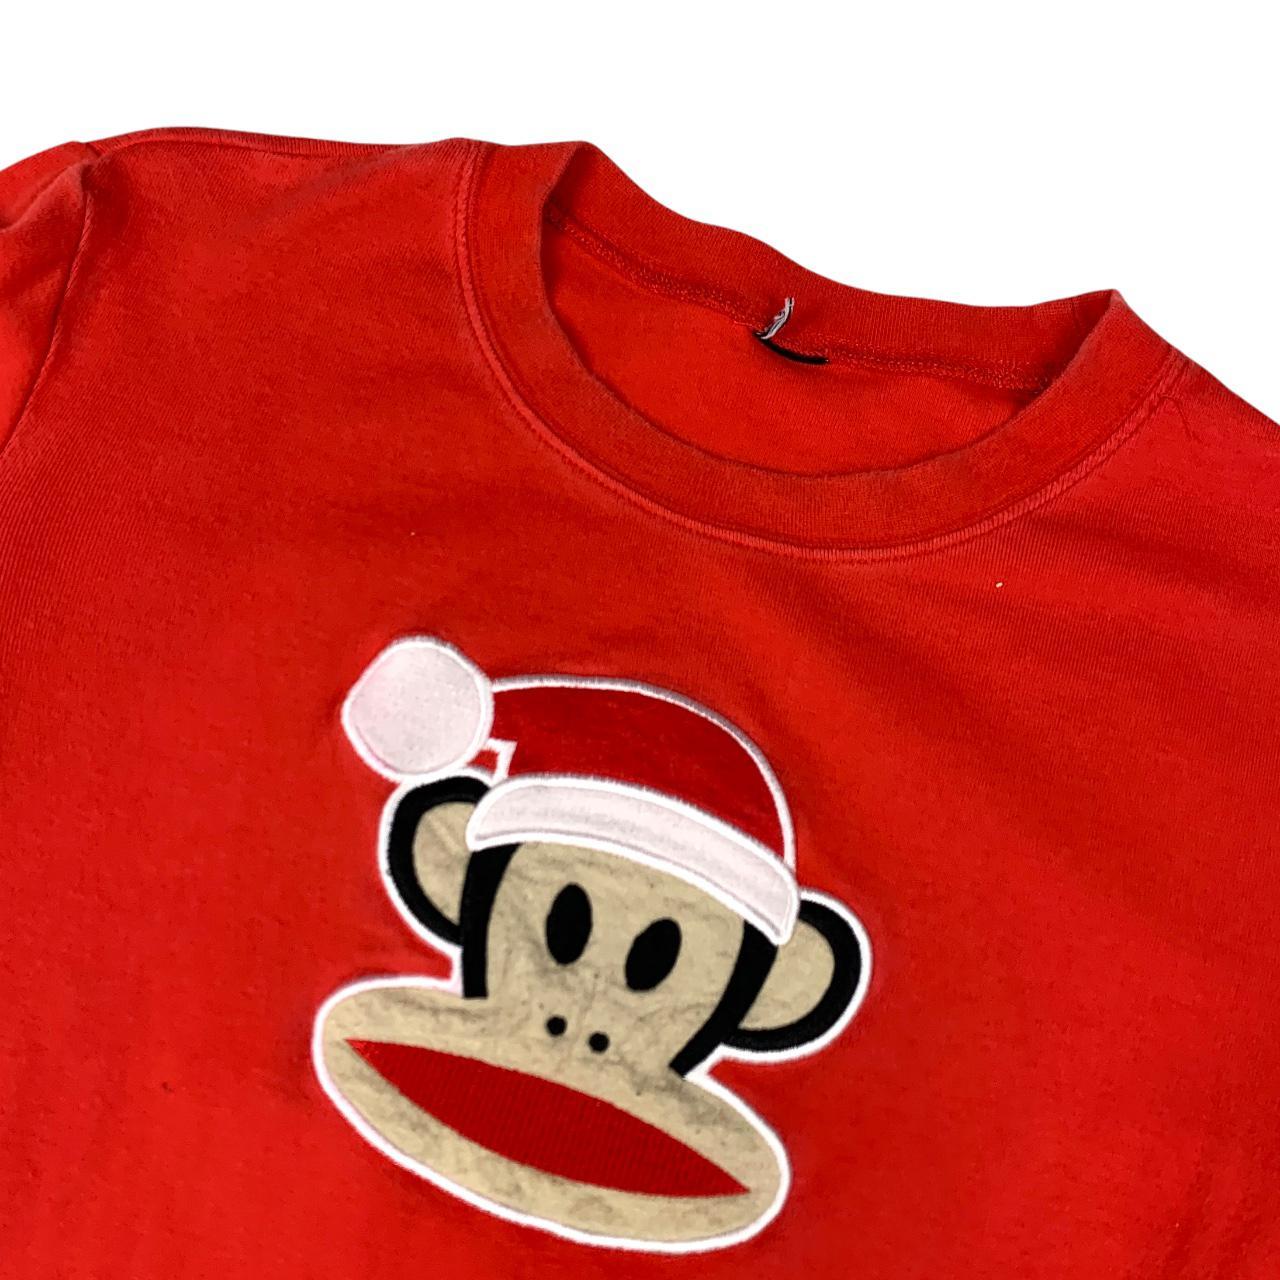 Paul Frank Women's Red and Black T-shirt (2)